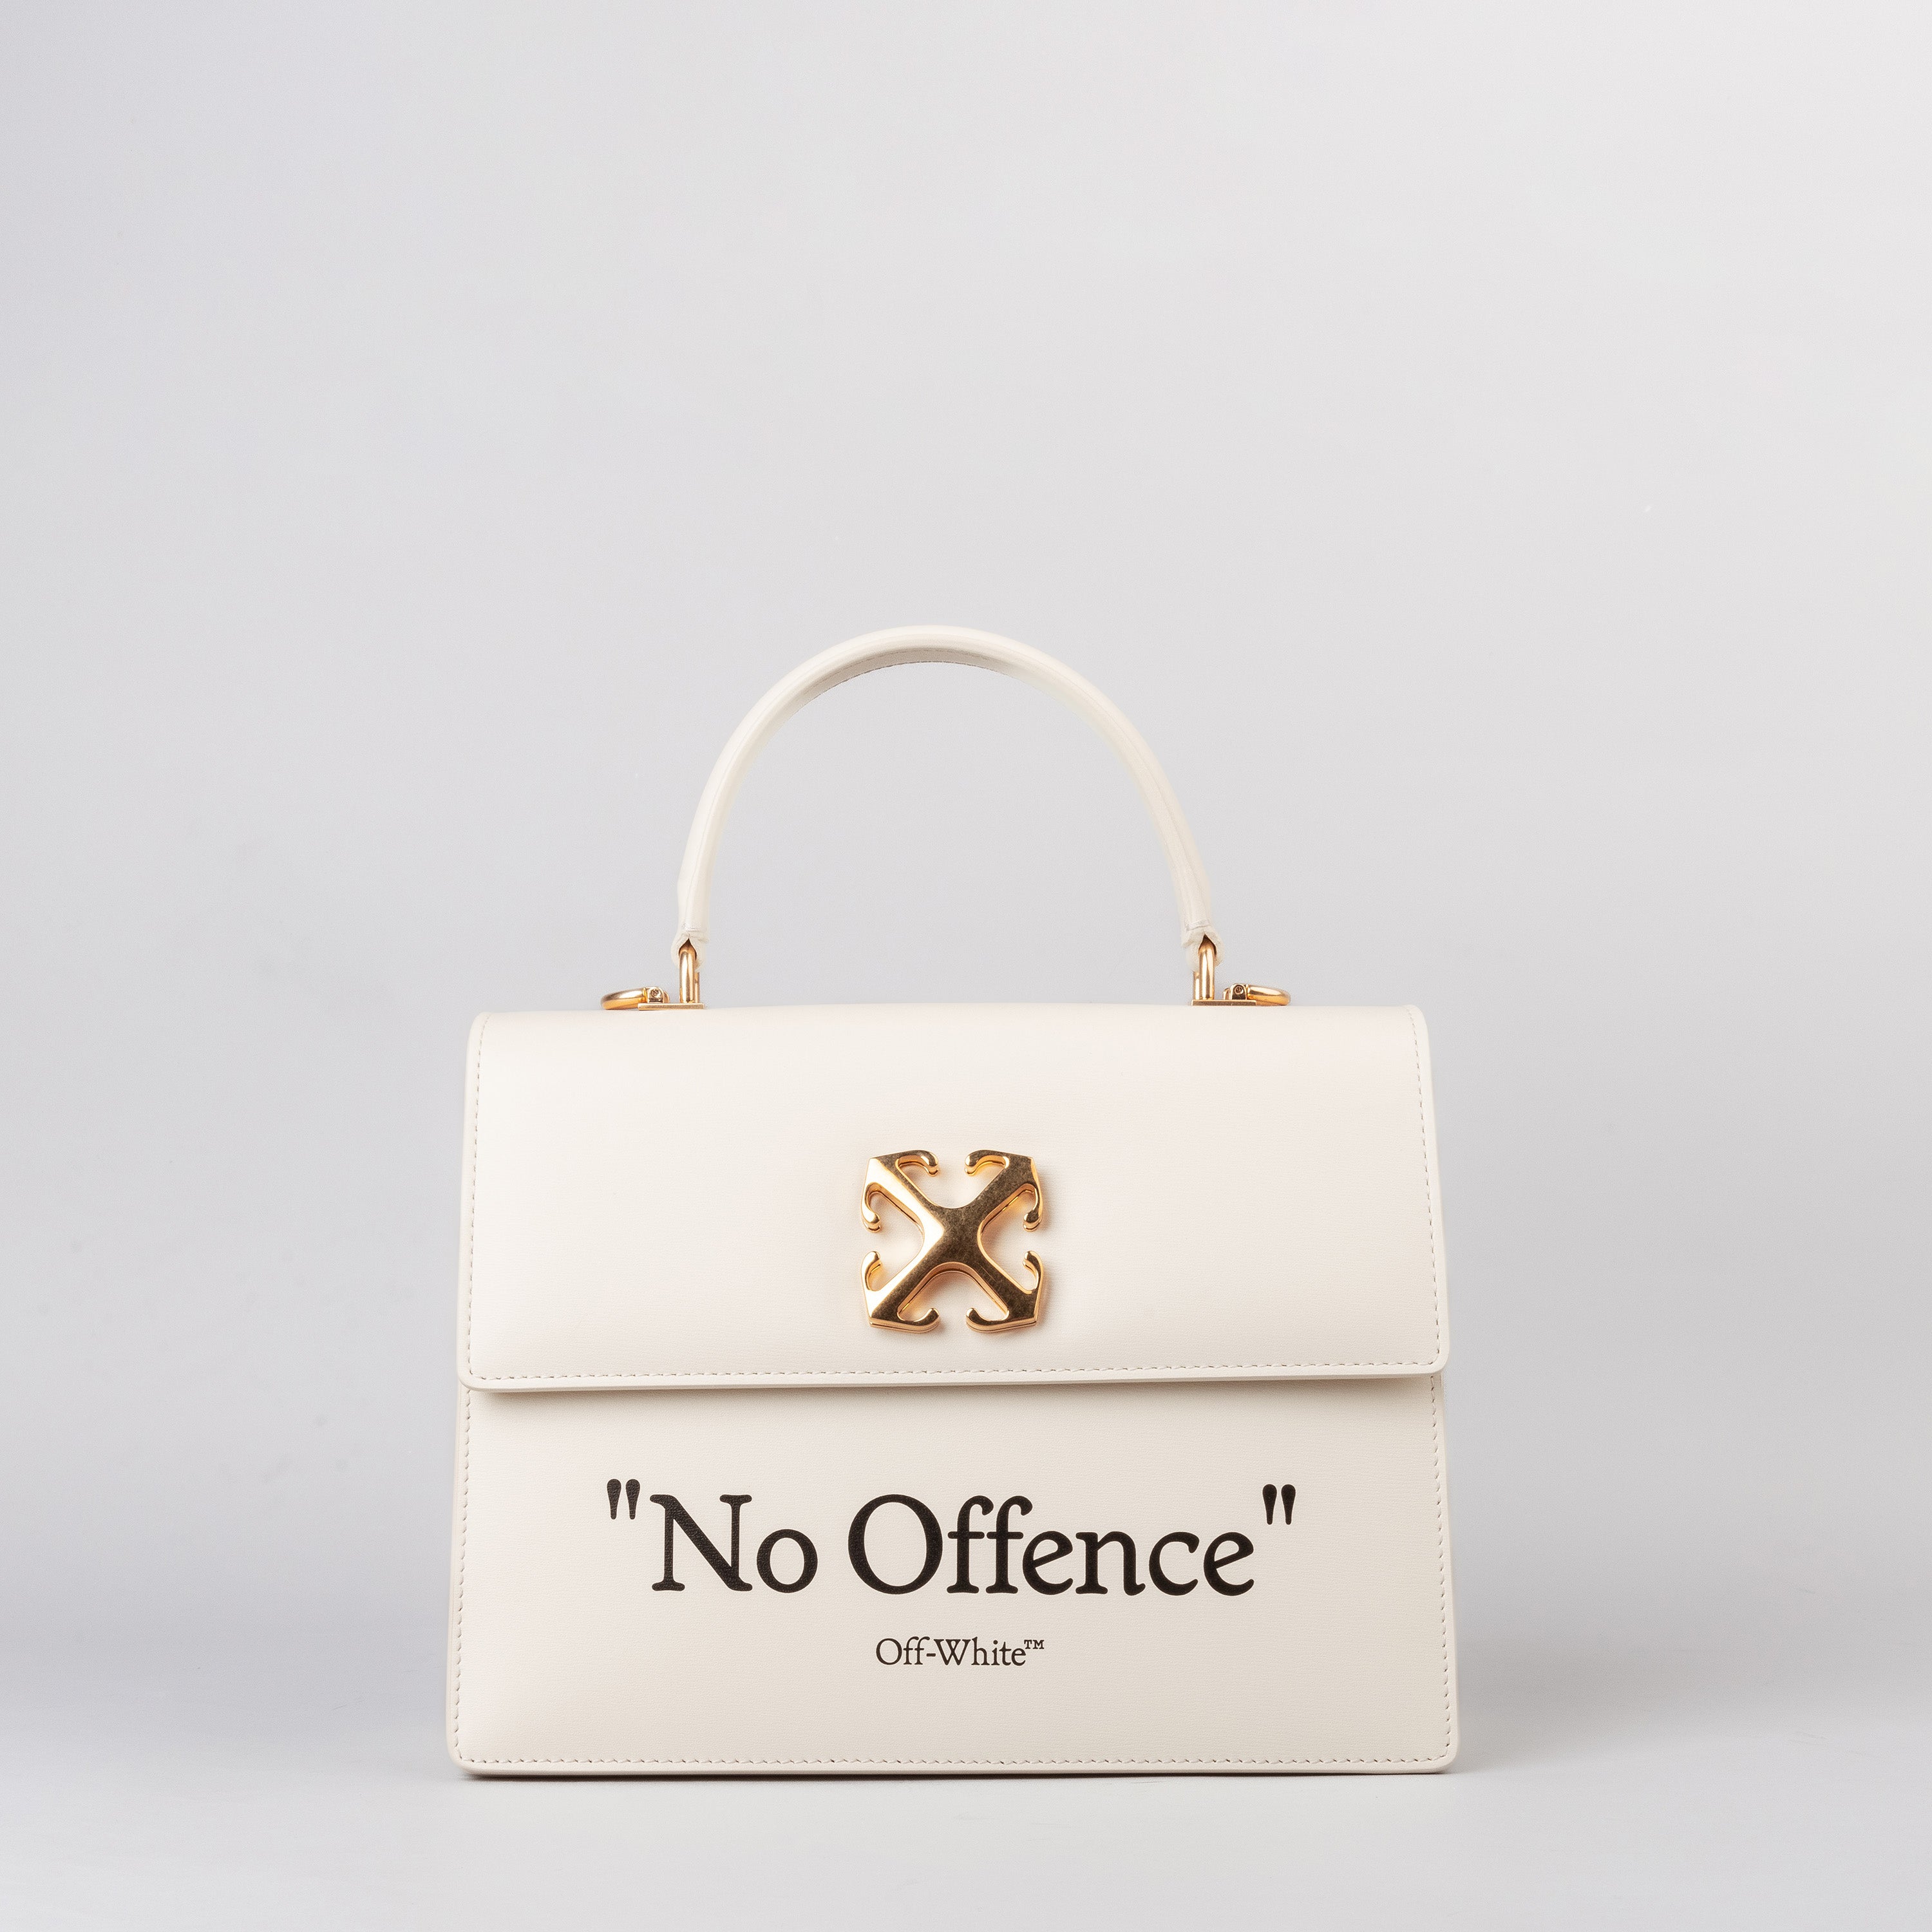 Cartera Beige Off-White Jitney 2.8 "No Offence"